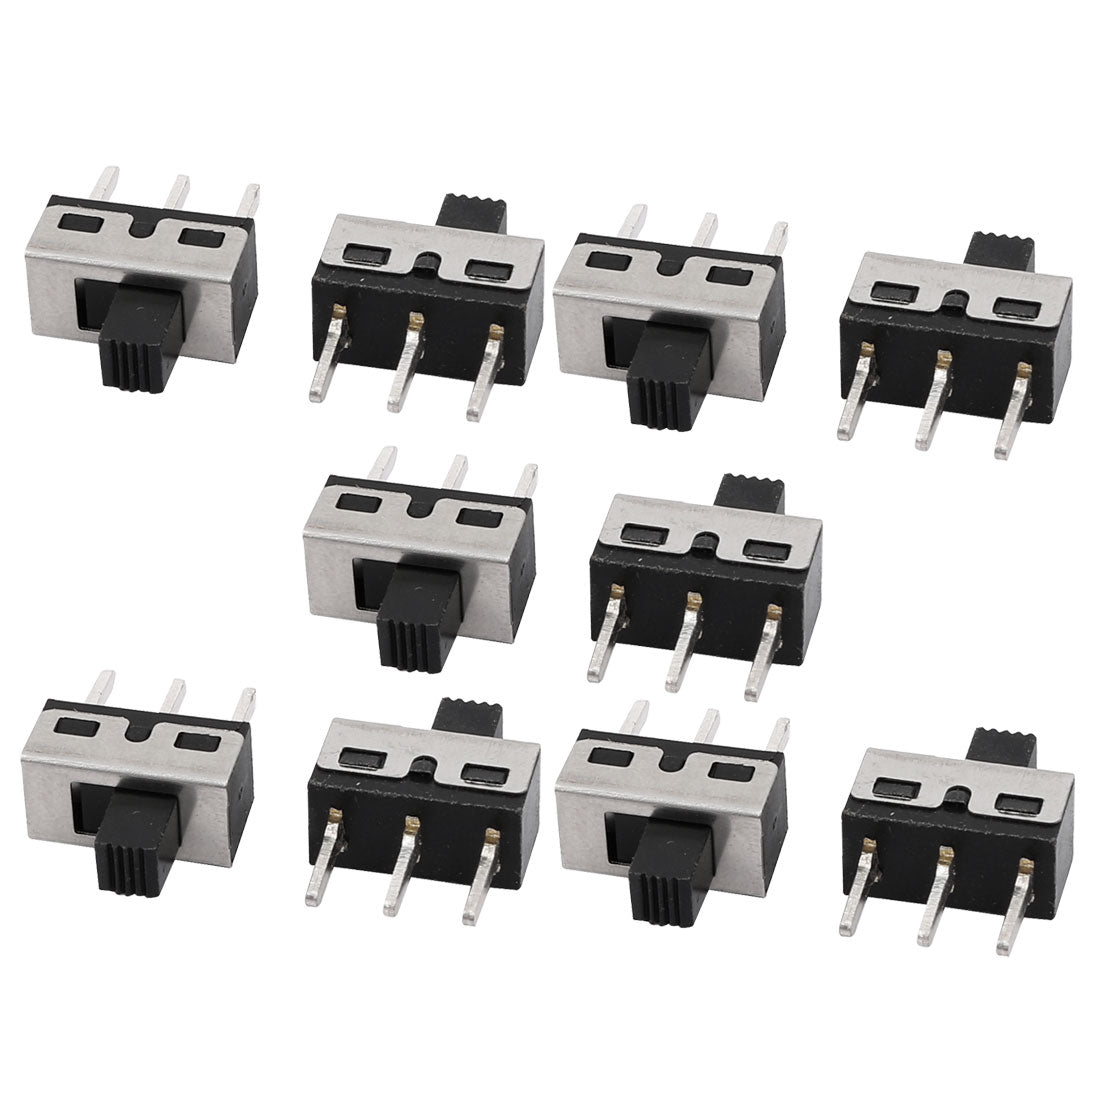 uxcell Uxcell 10Pcs AC 125V 3A 2 Position SPDT 3 Terminal PCB Mounting Horizontal Mini Slide Switch